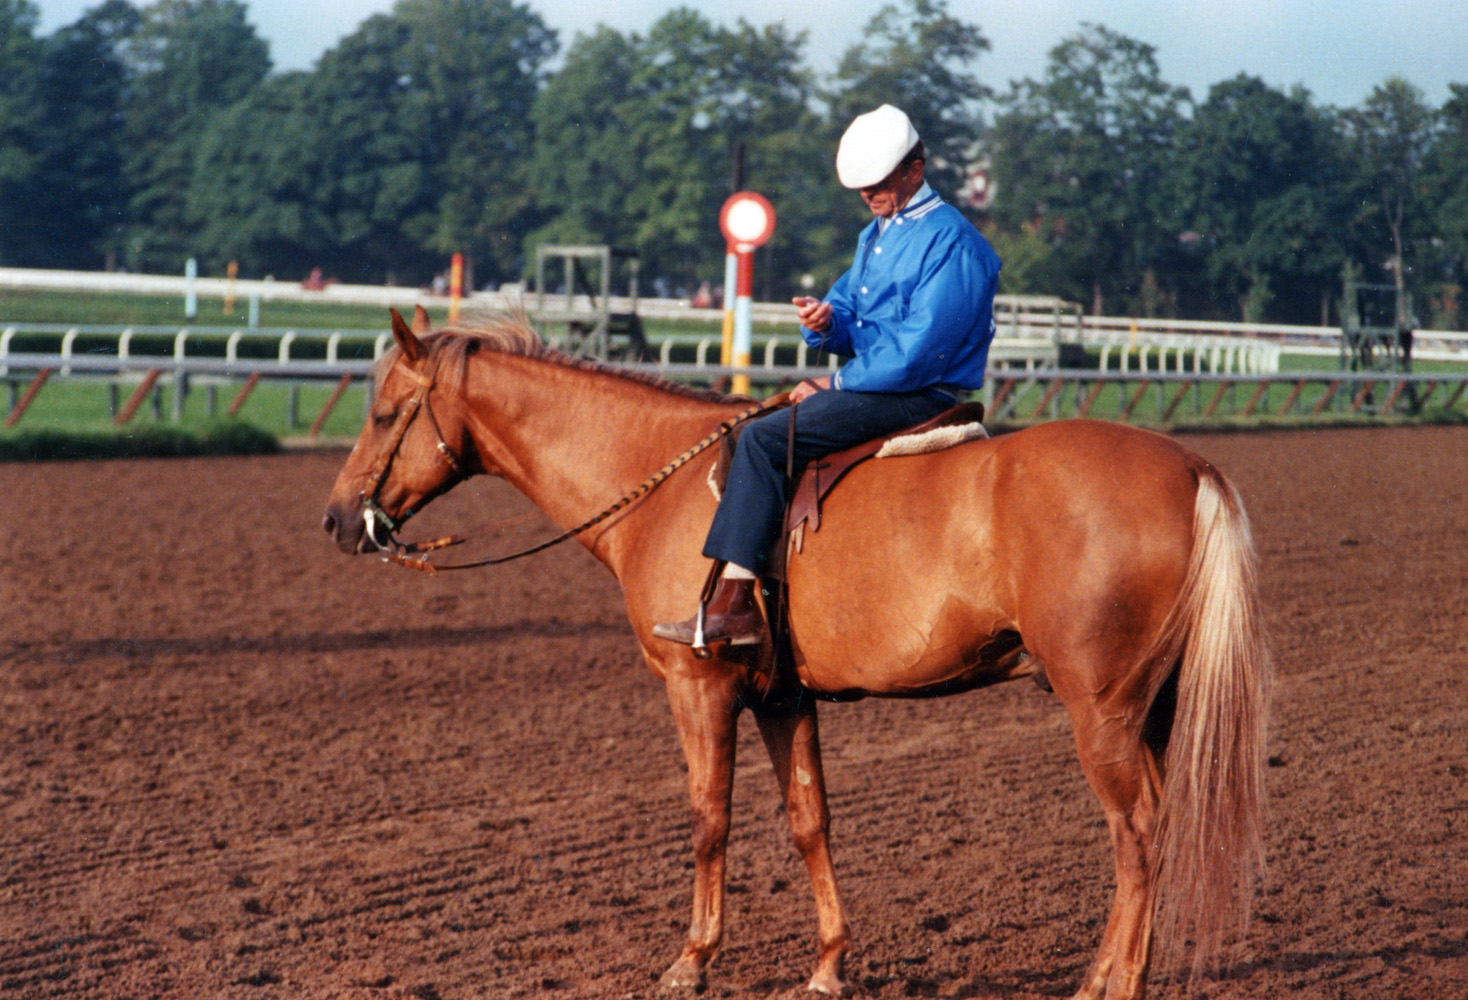 Woody Stephens on Rex, a gift from Fred Astaire, at Saratoga (Mike Pender/Museum Collection)